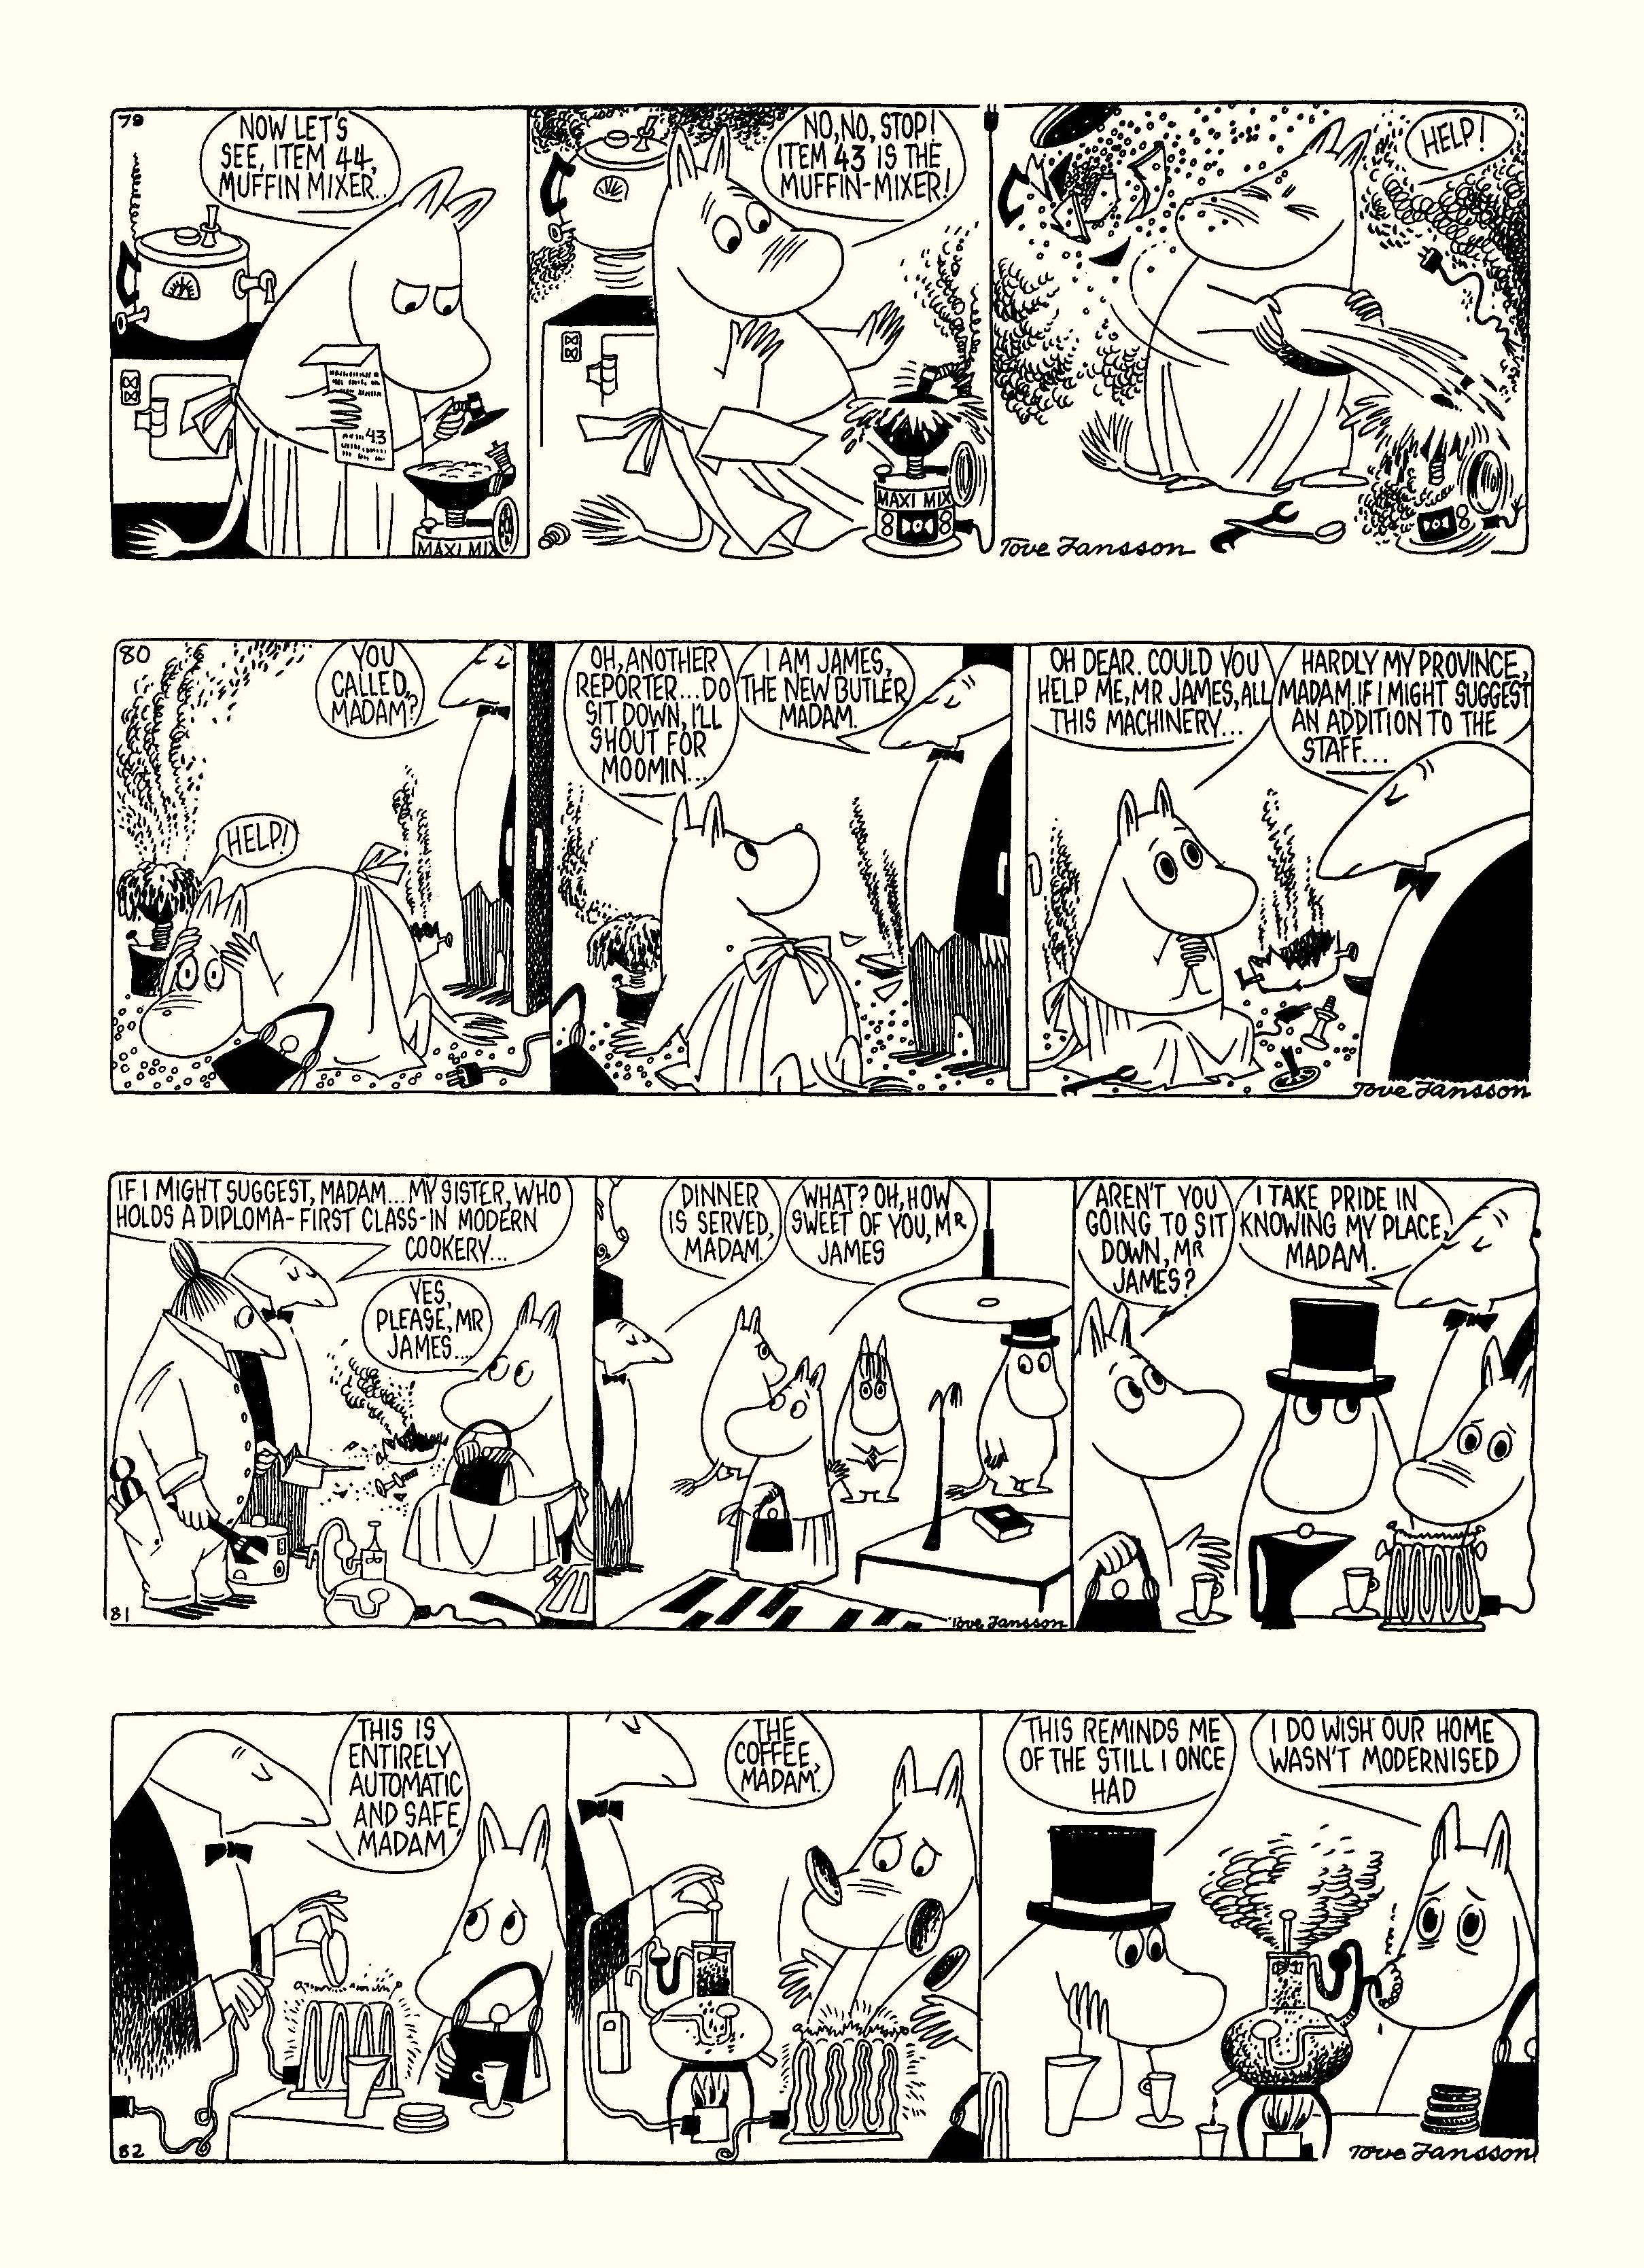 Read online Moomin: The Complete Tove Jansson Comic Strip comic -  Issue # TPB 4 - 99